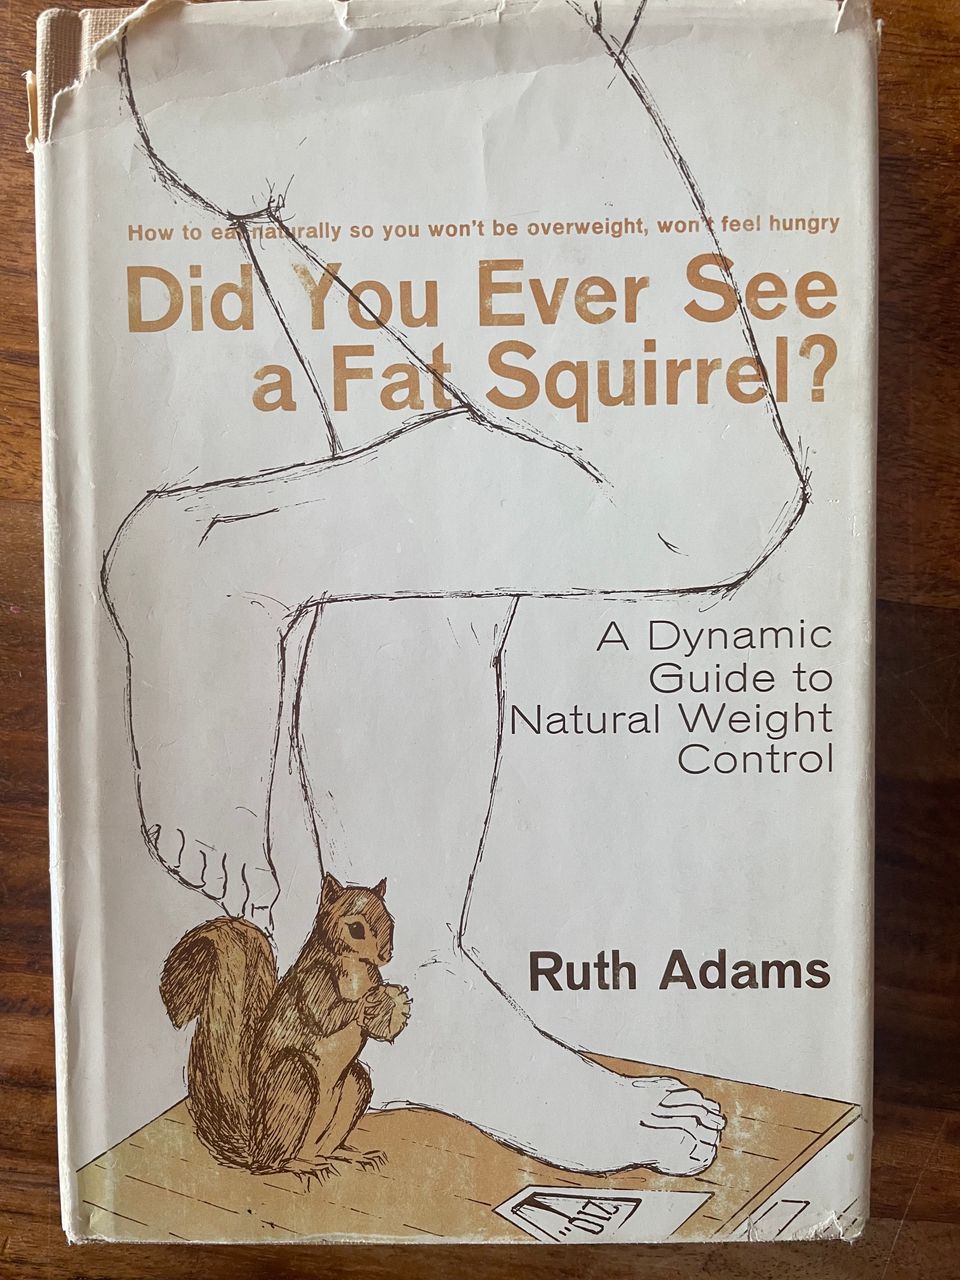 "Did You Ever See A Fat Squirrel?" yes all the time